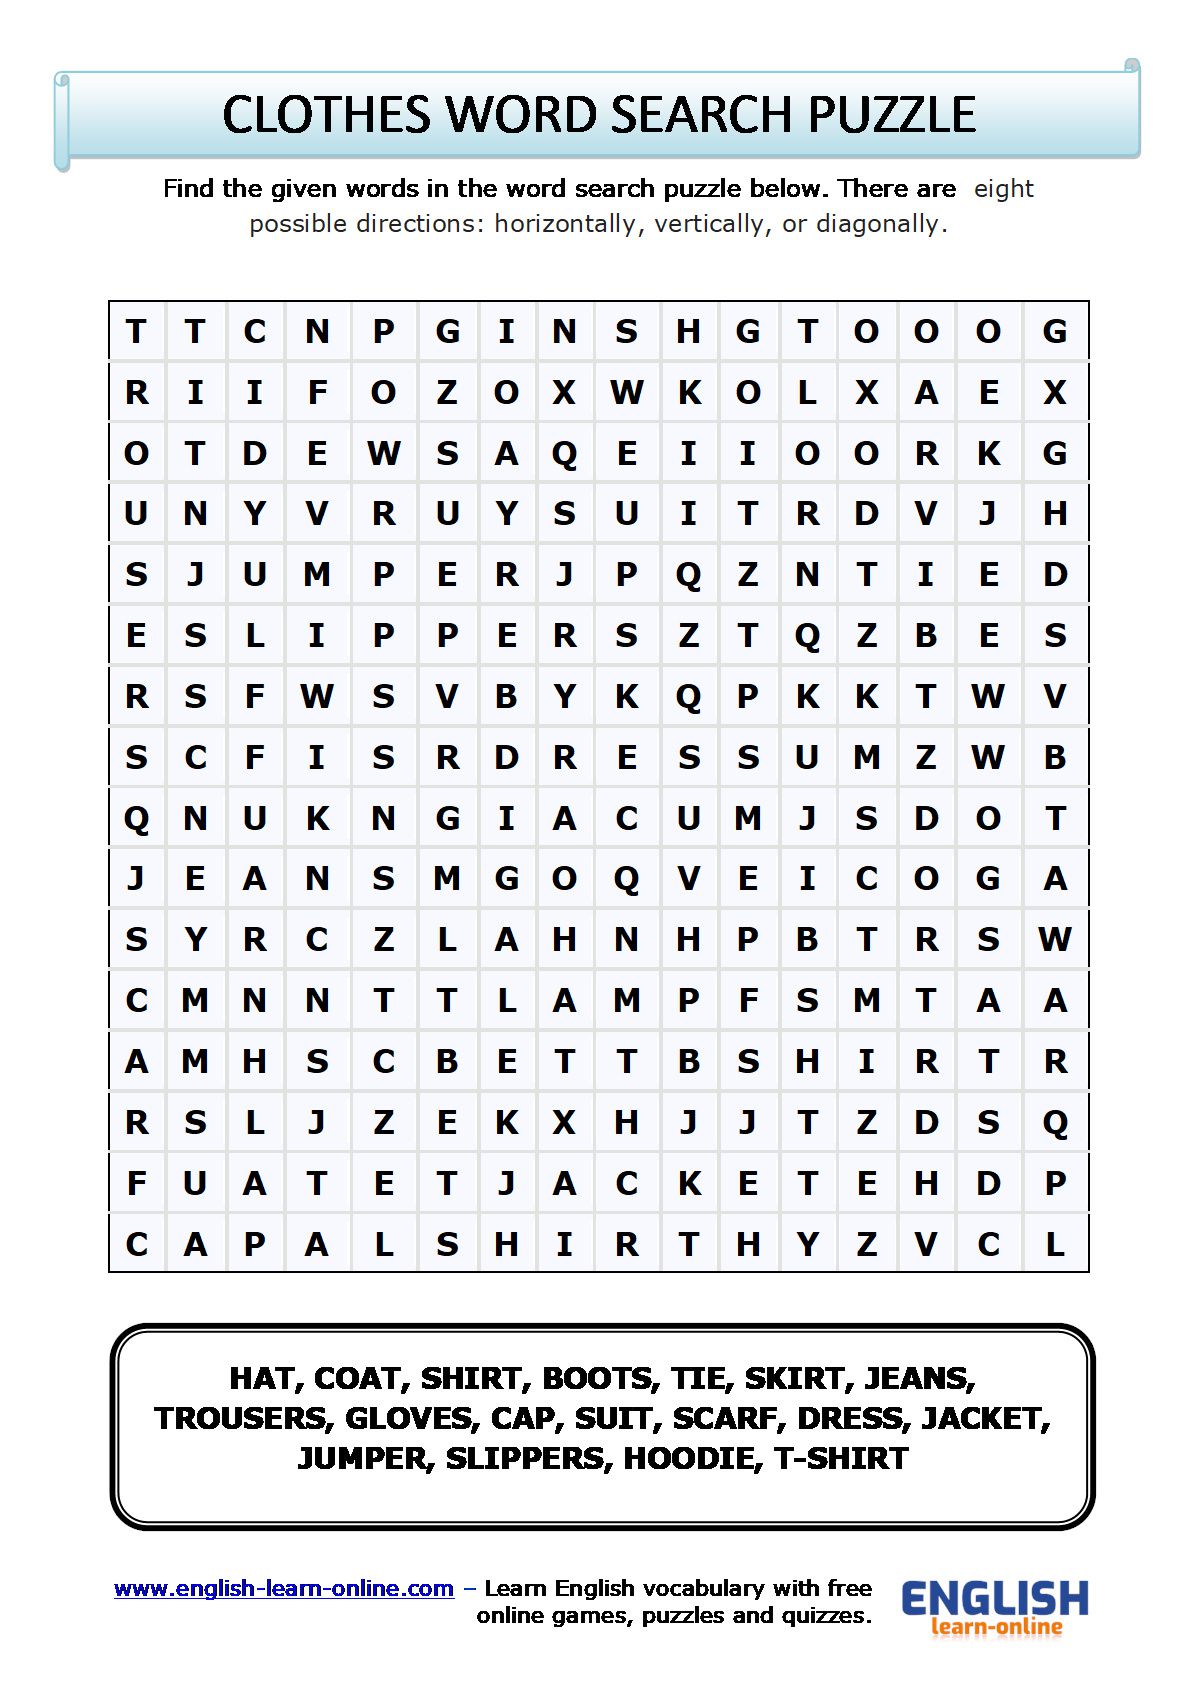 Clothes Word Search - Exercise 1 (Vocabulary worksheet) - Your